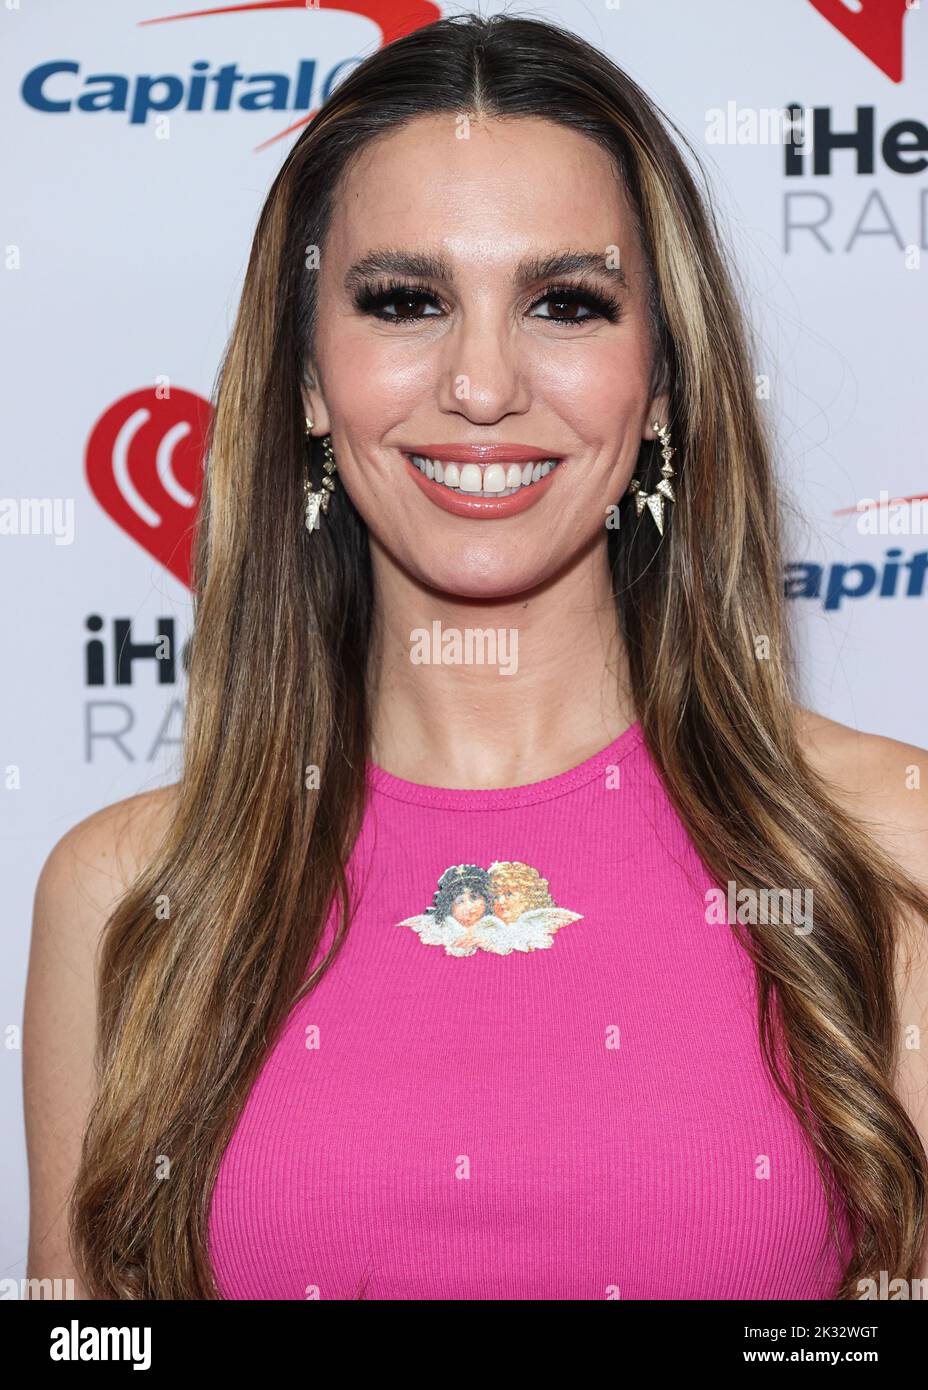 LAS VEGAS, NEVADA, USA - SEPTEMBER 23: Christy Carlson Romano poses in the press room at the 2022 iHeartRadio Music Festival - Night 1 held at the T-Mobile Arena on September 23, 2022 in Las Vegas, Nevada, United States. (Photo by Xavier Collin/Image Press Agency) Stock Photo